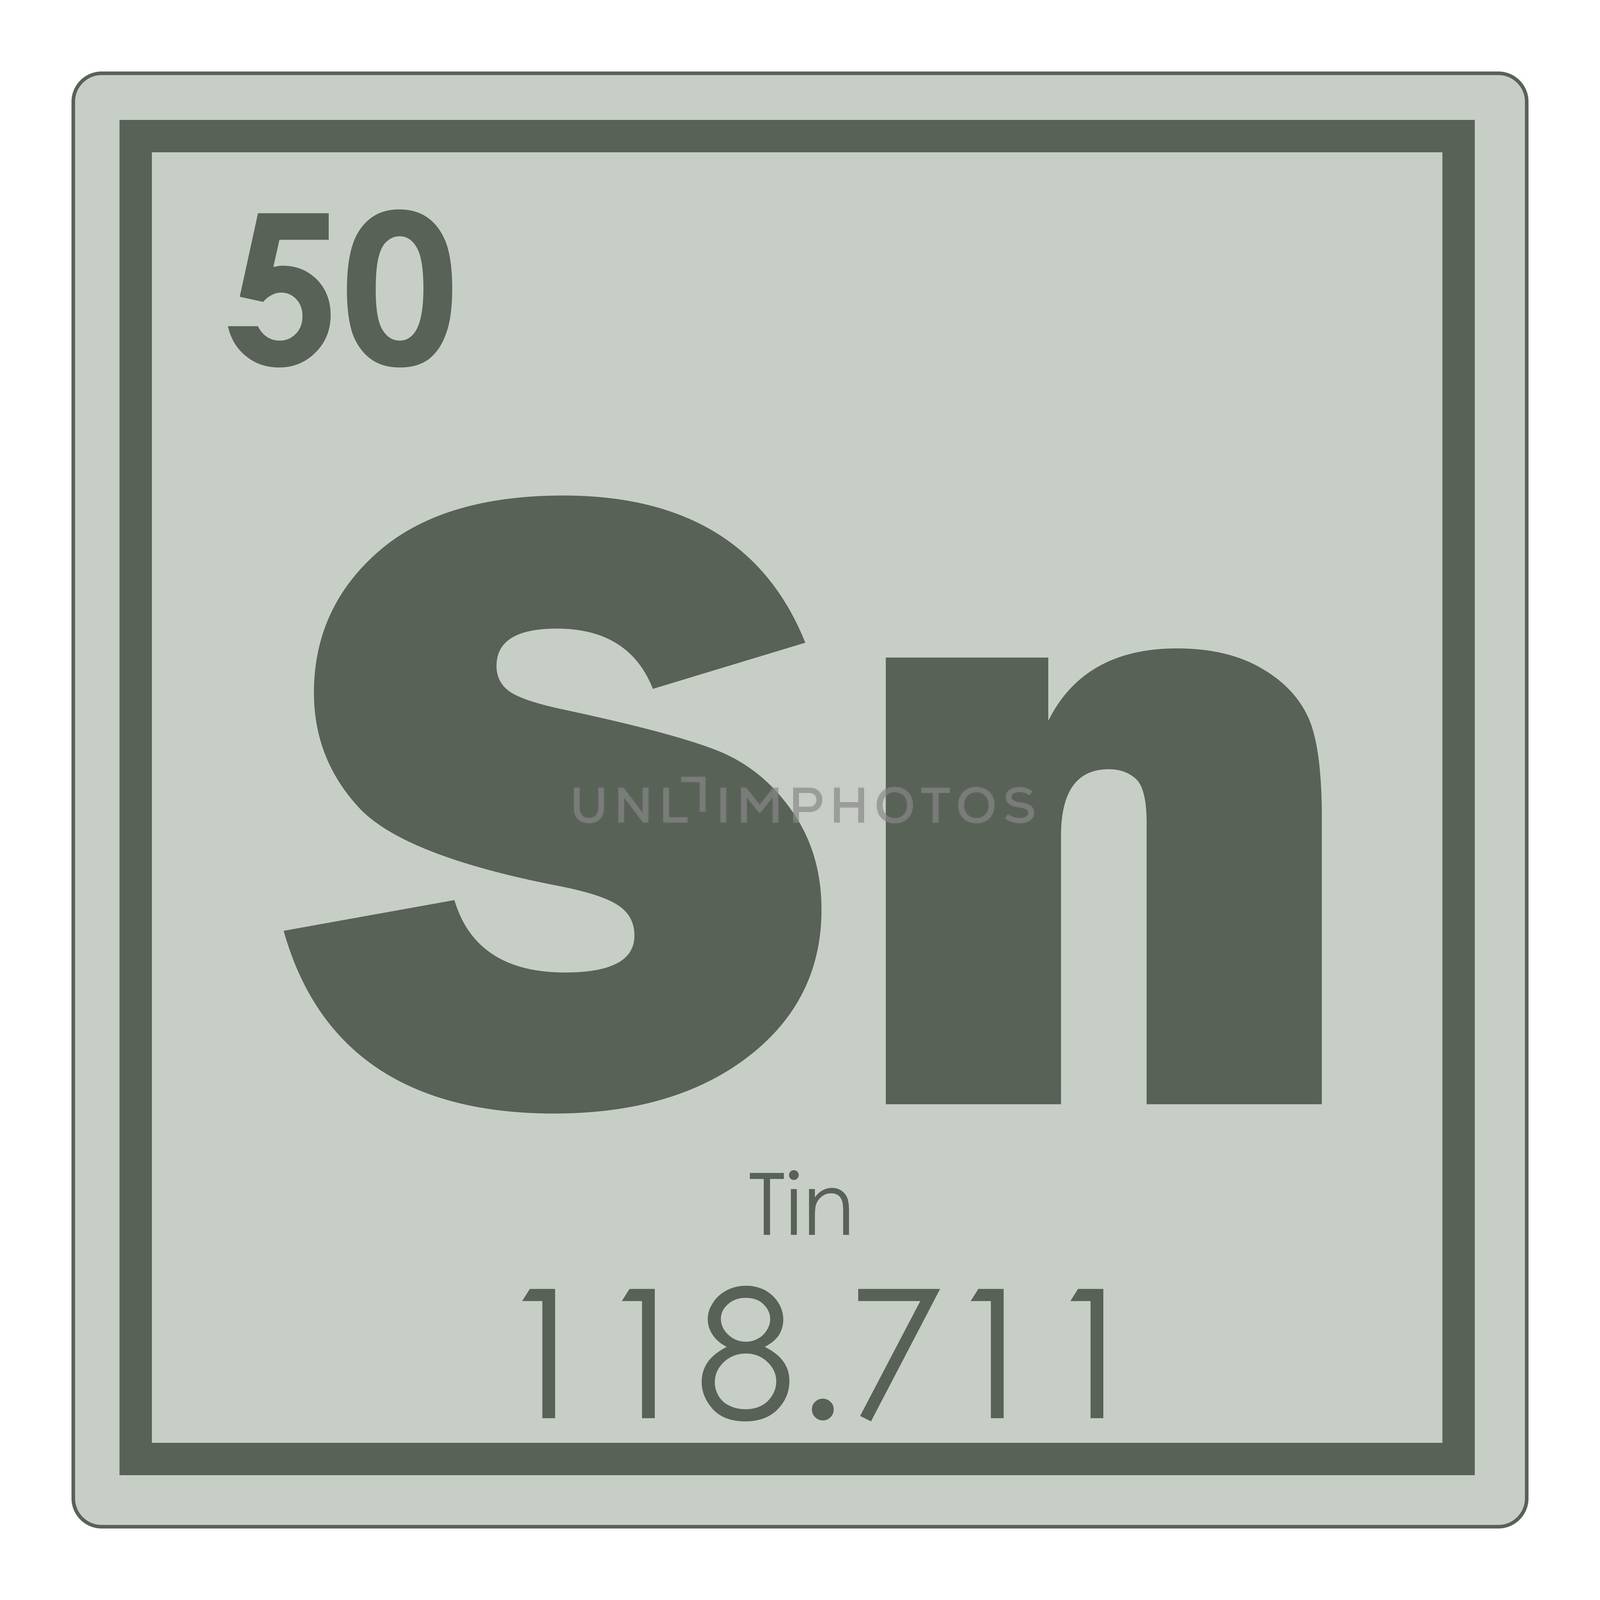 Tin chemical element by tony4urban